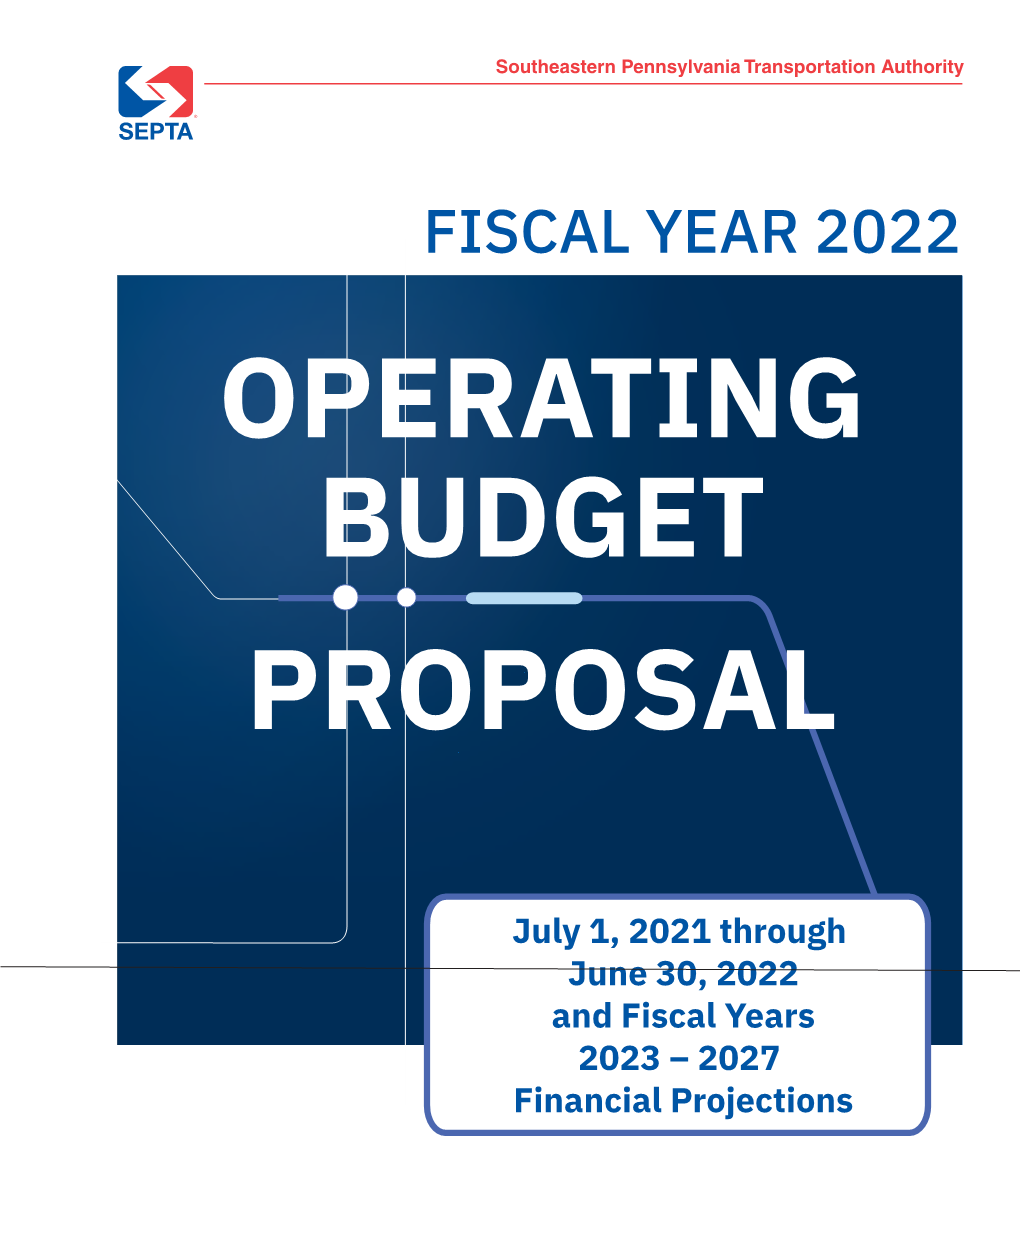 Fiscal Year 2022 Operating Budget Proposal